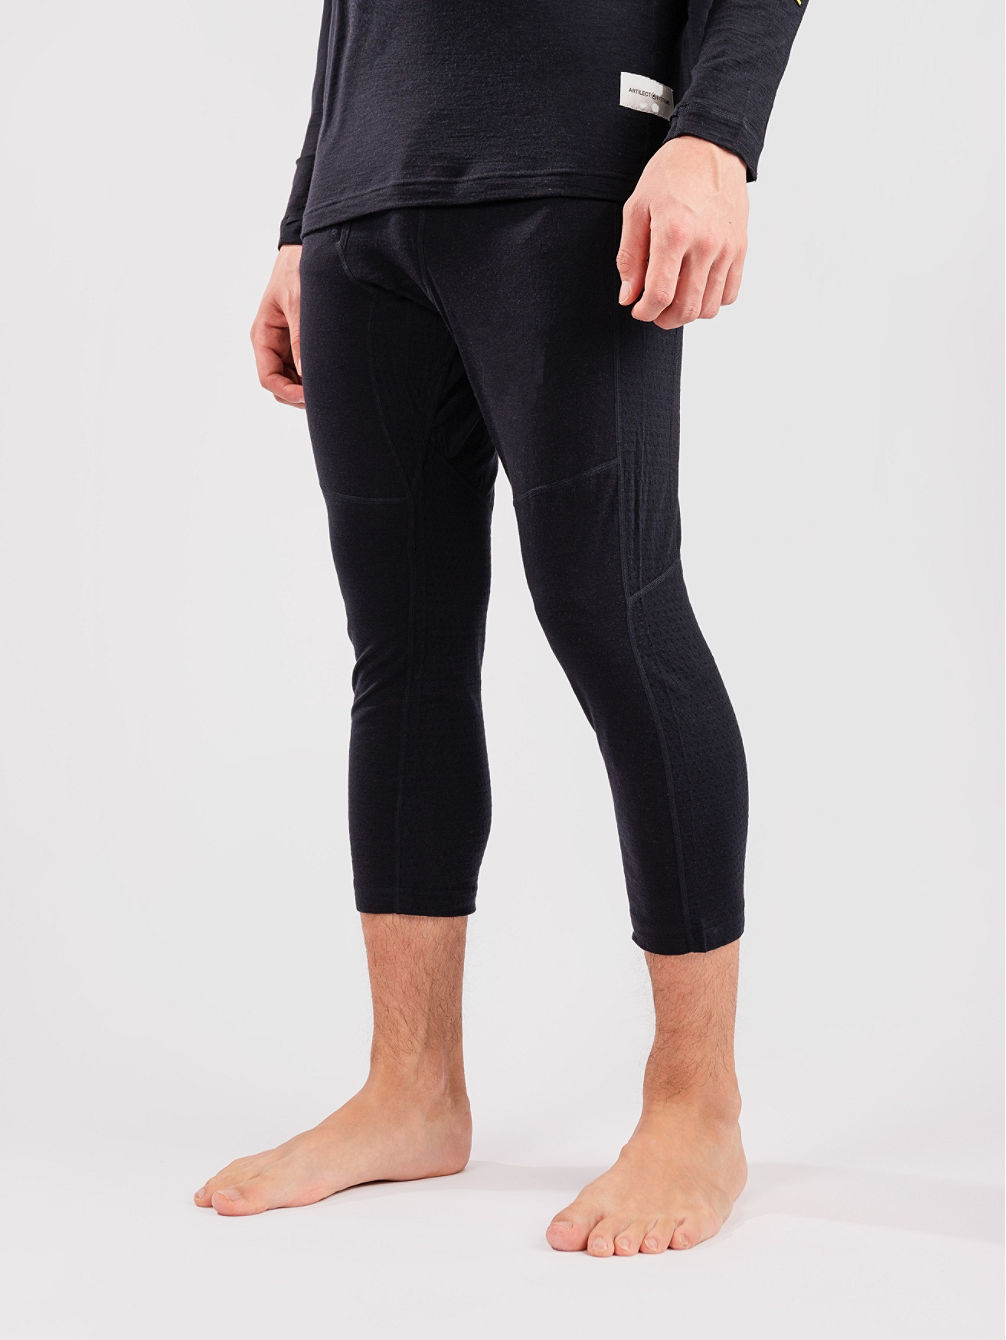 Goldhill 125 Zoned 3/4 Base Layer Bottoms